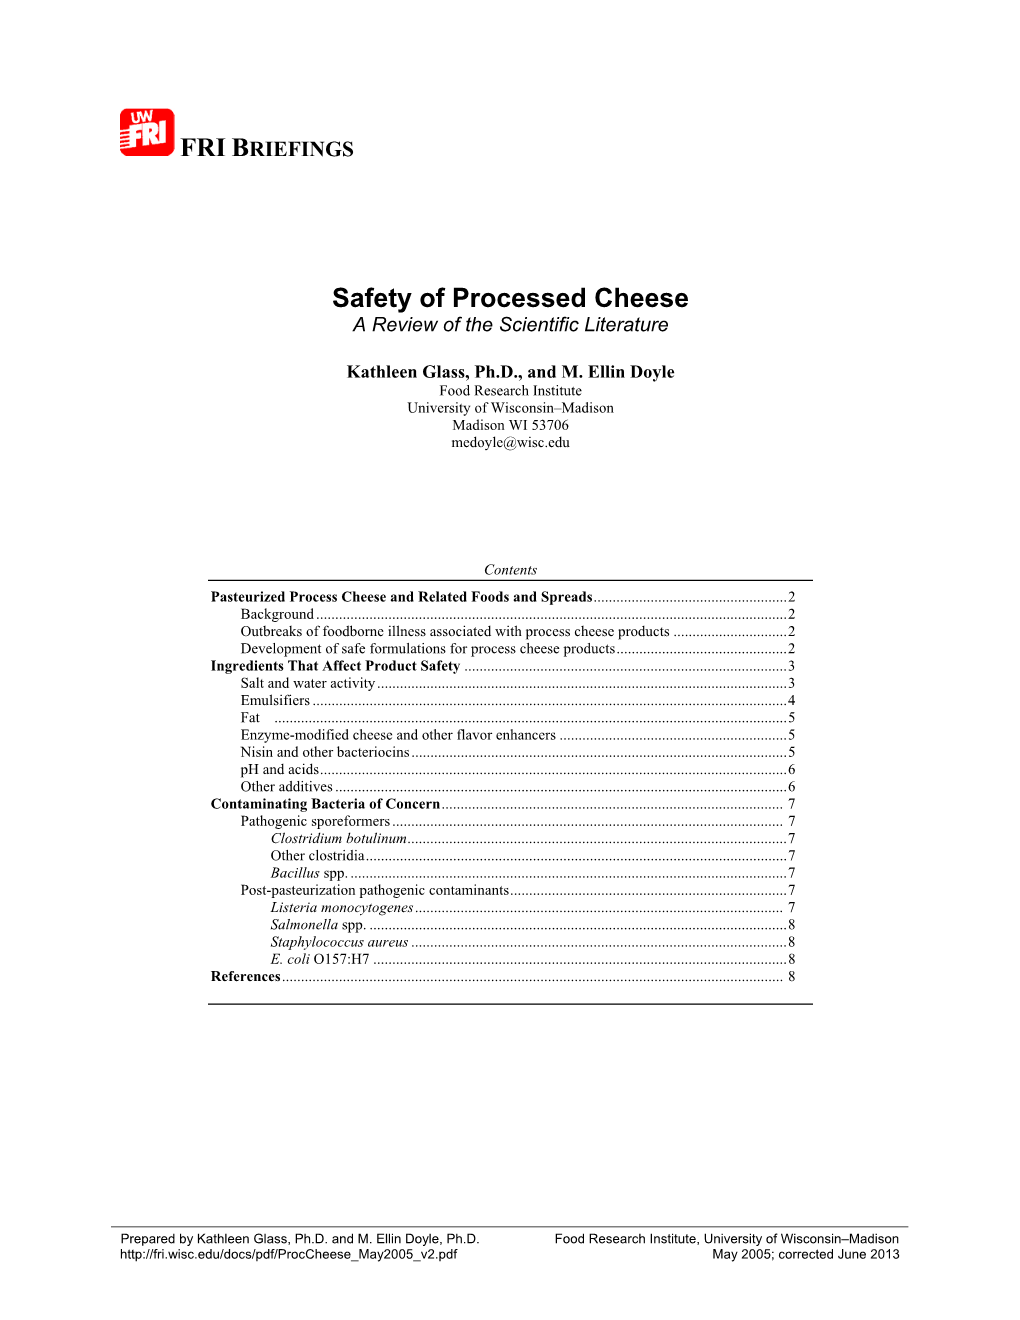 Safety of Processed Cheese a Review of the Scientific Literature